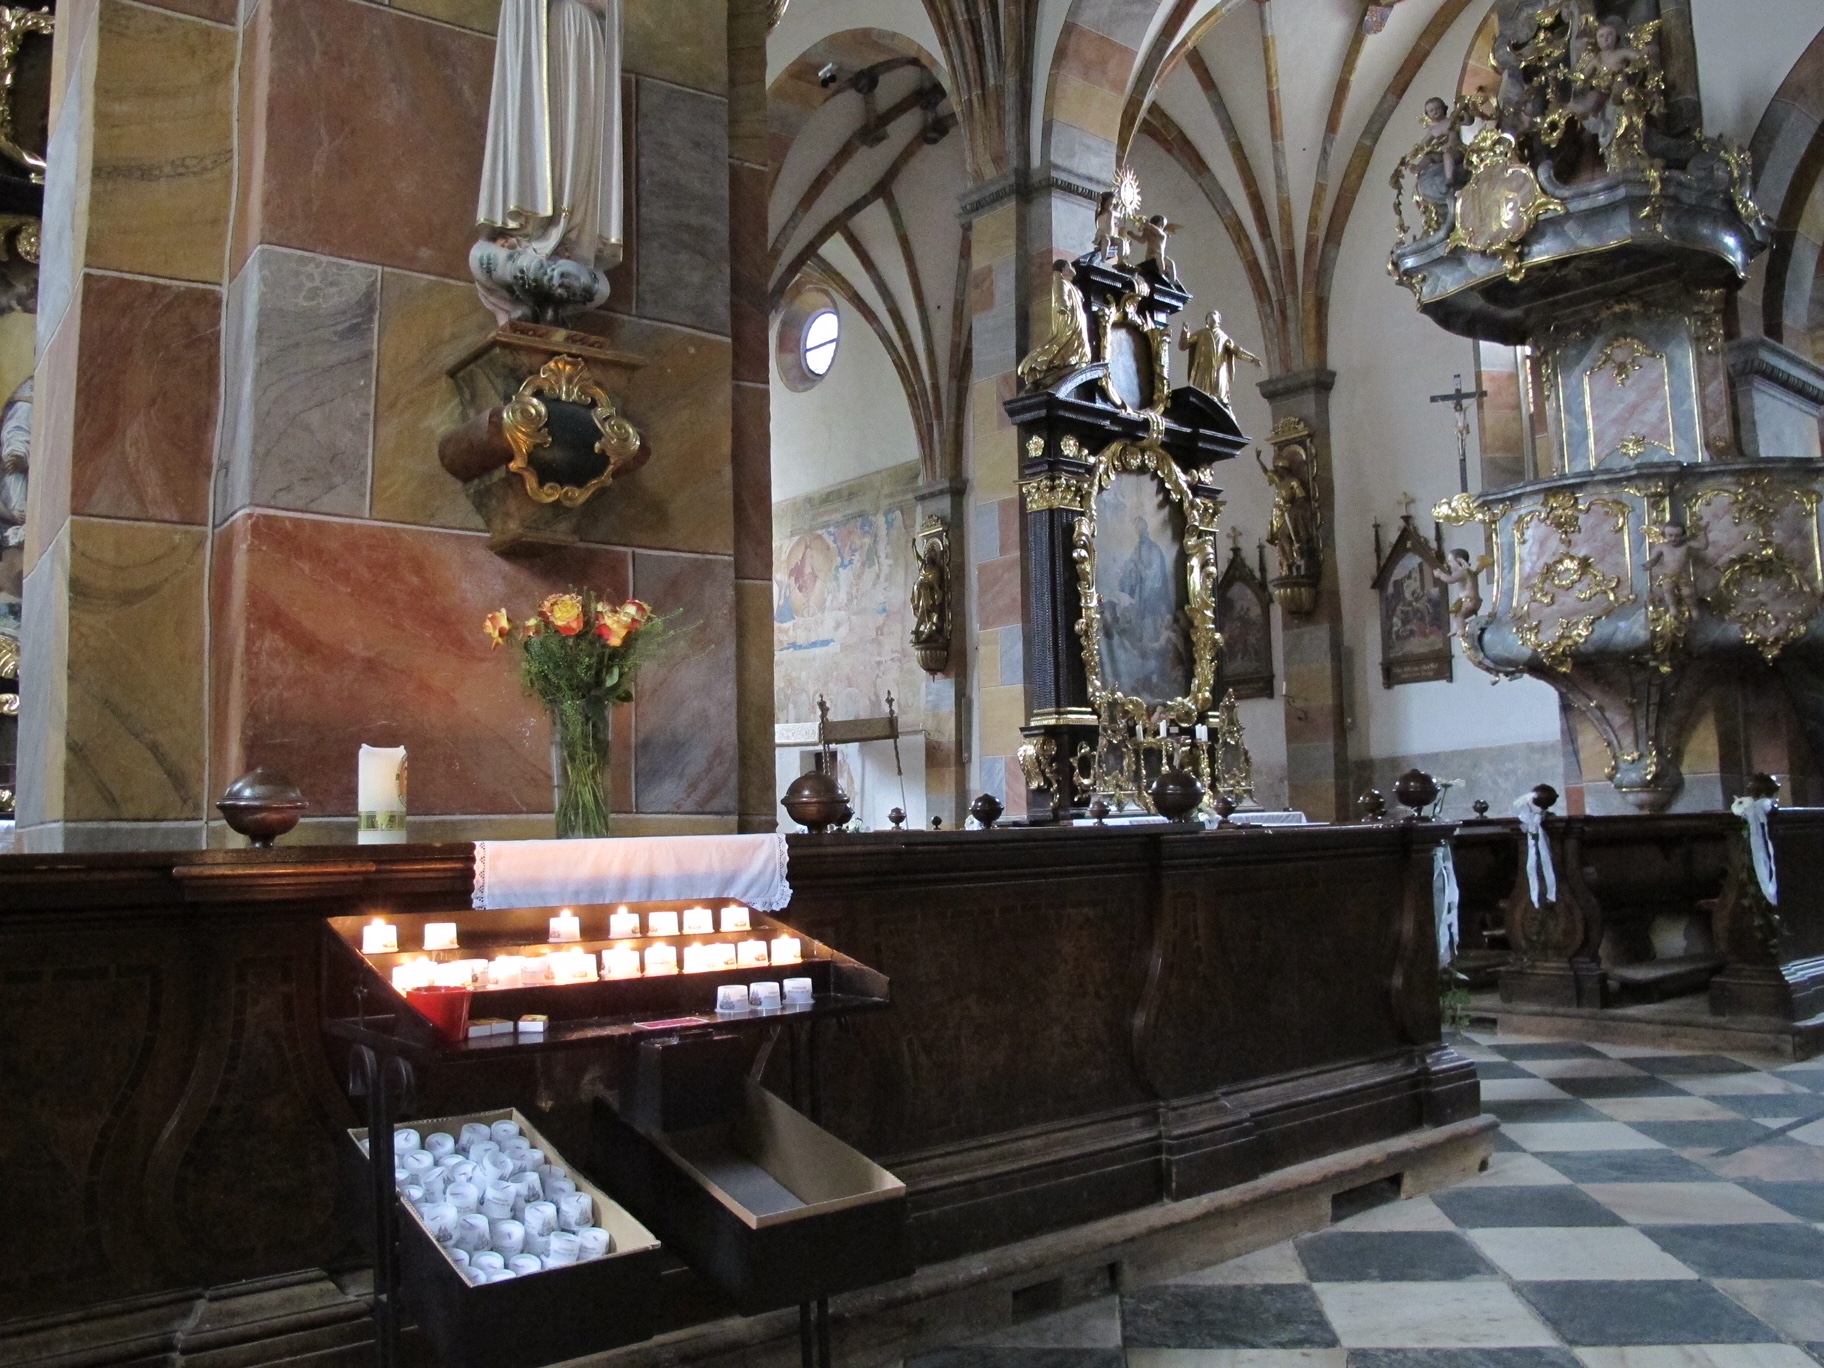 Trainspotter: Lighting a Candle for Diddley: St Mary Spittal an der Drau